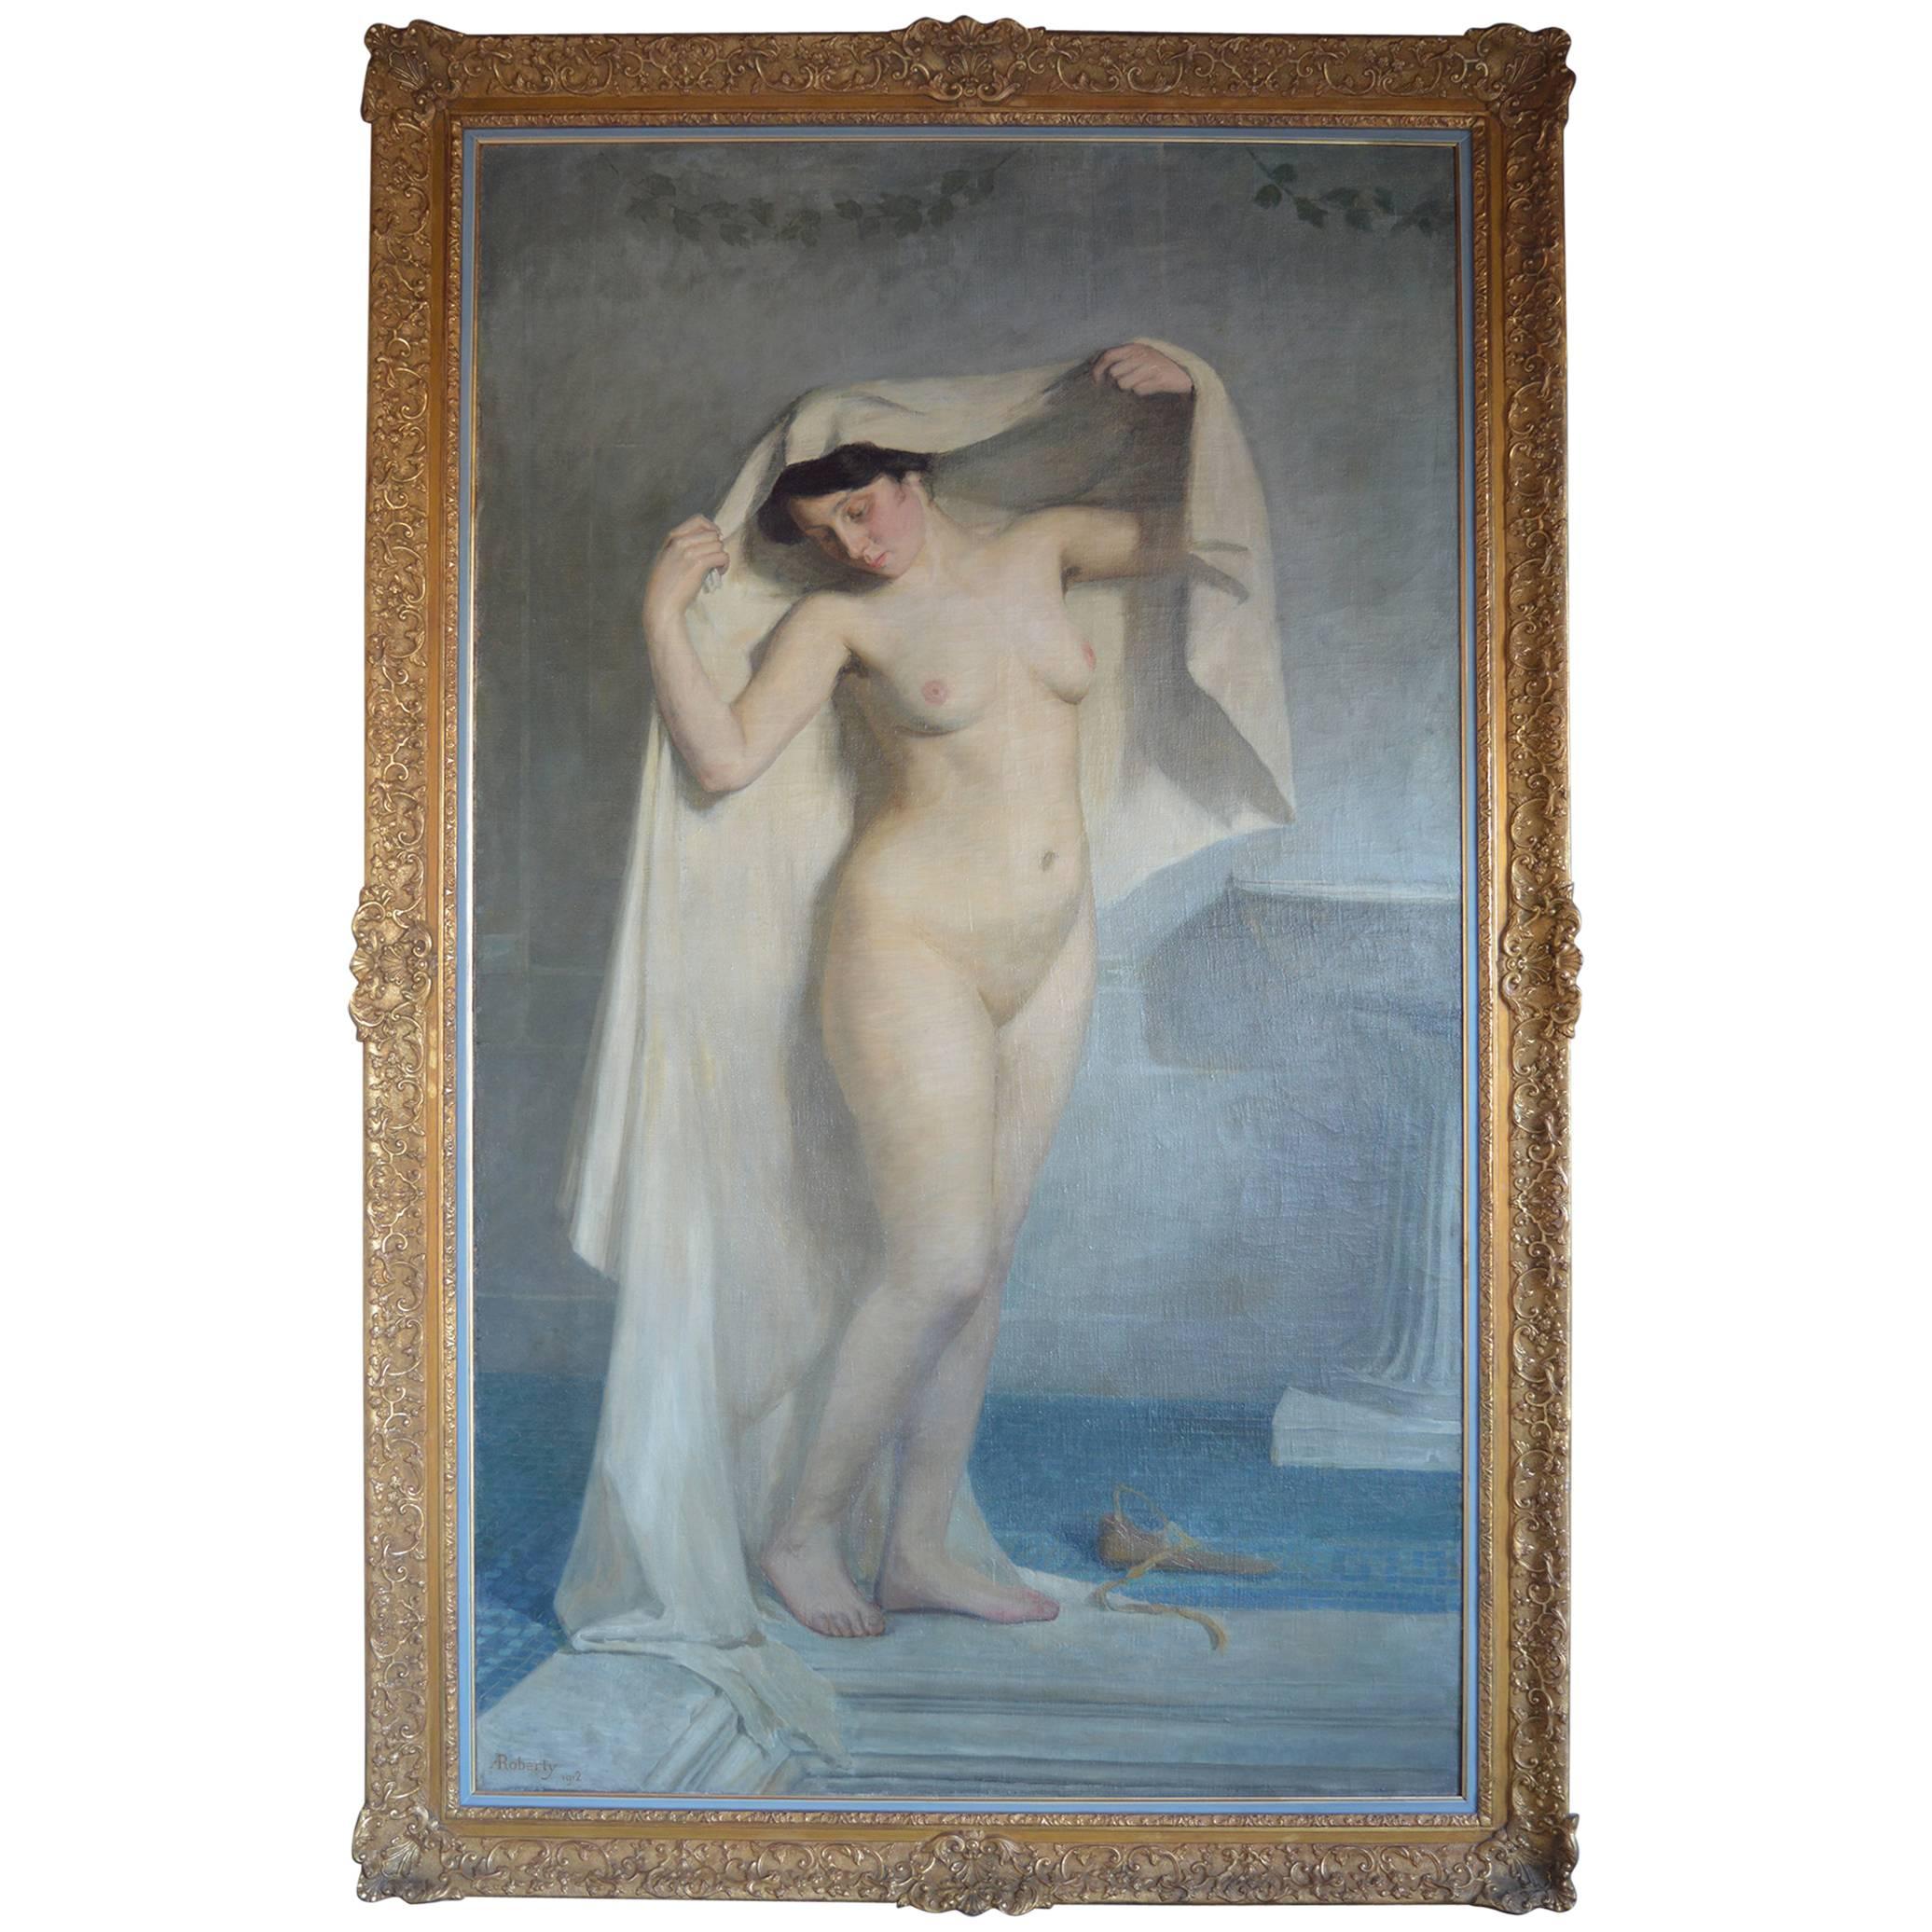 Nude Painting of a Woman by A.Roberty